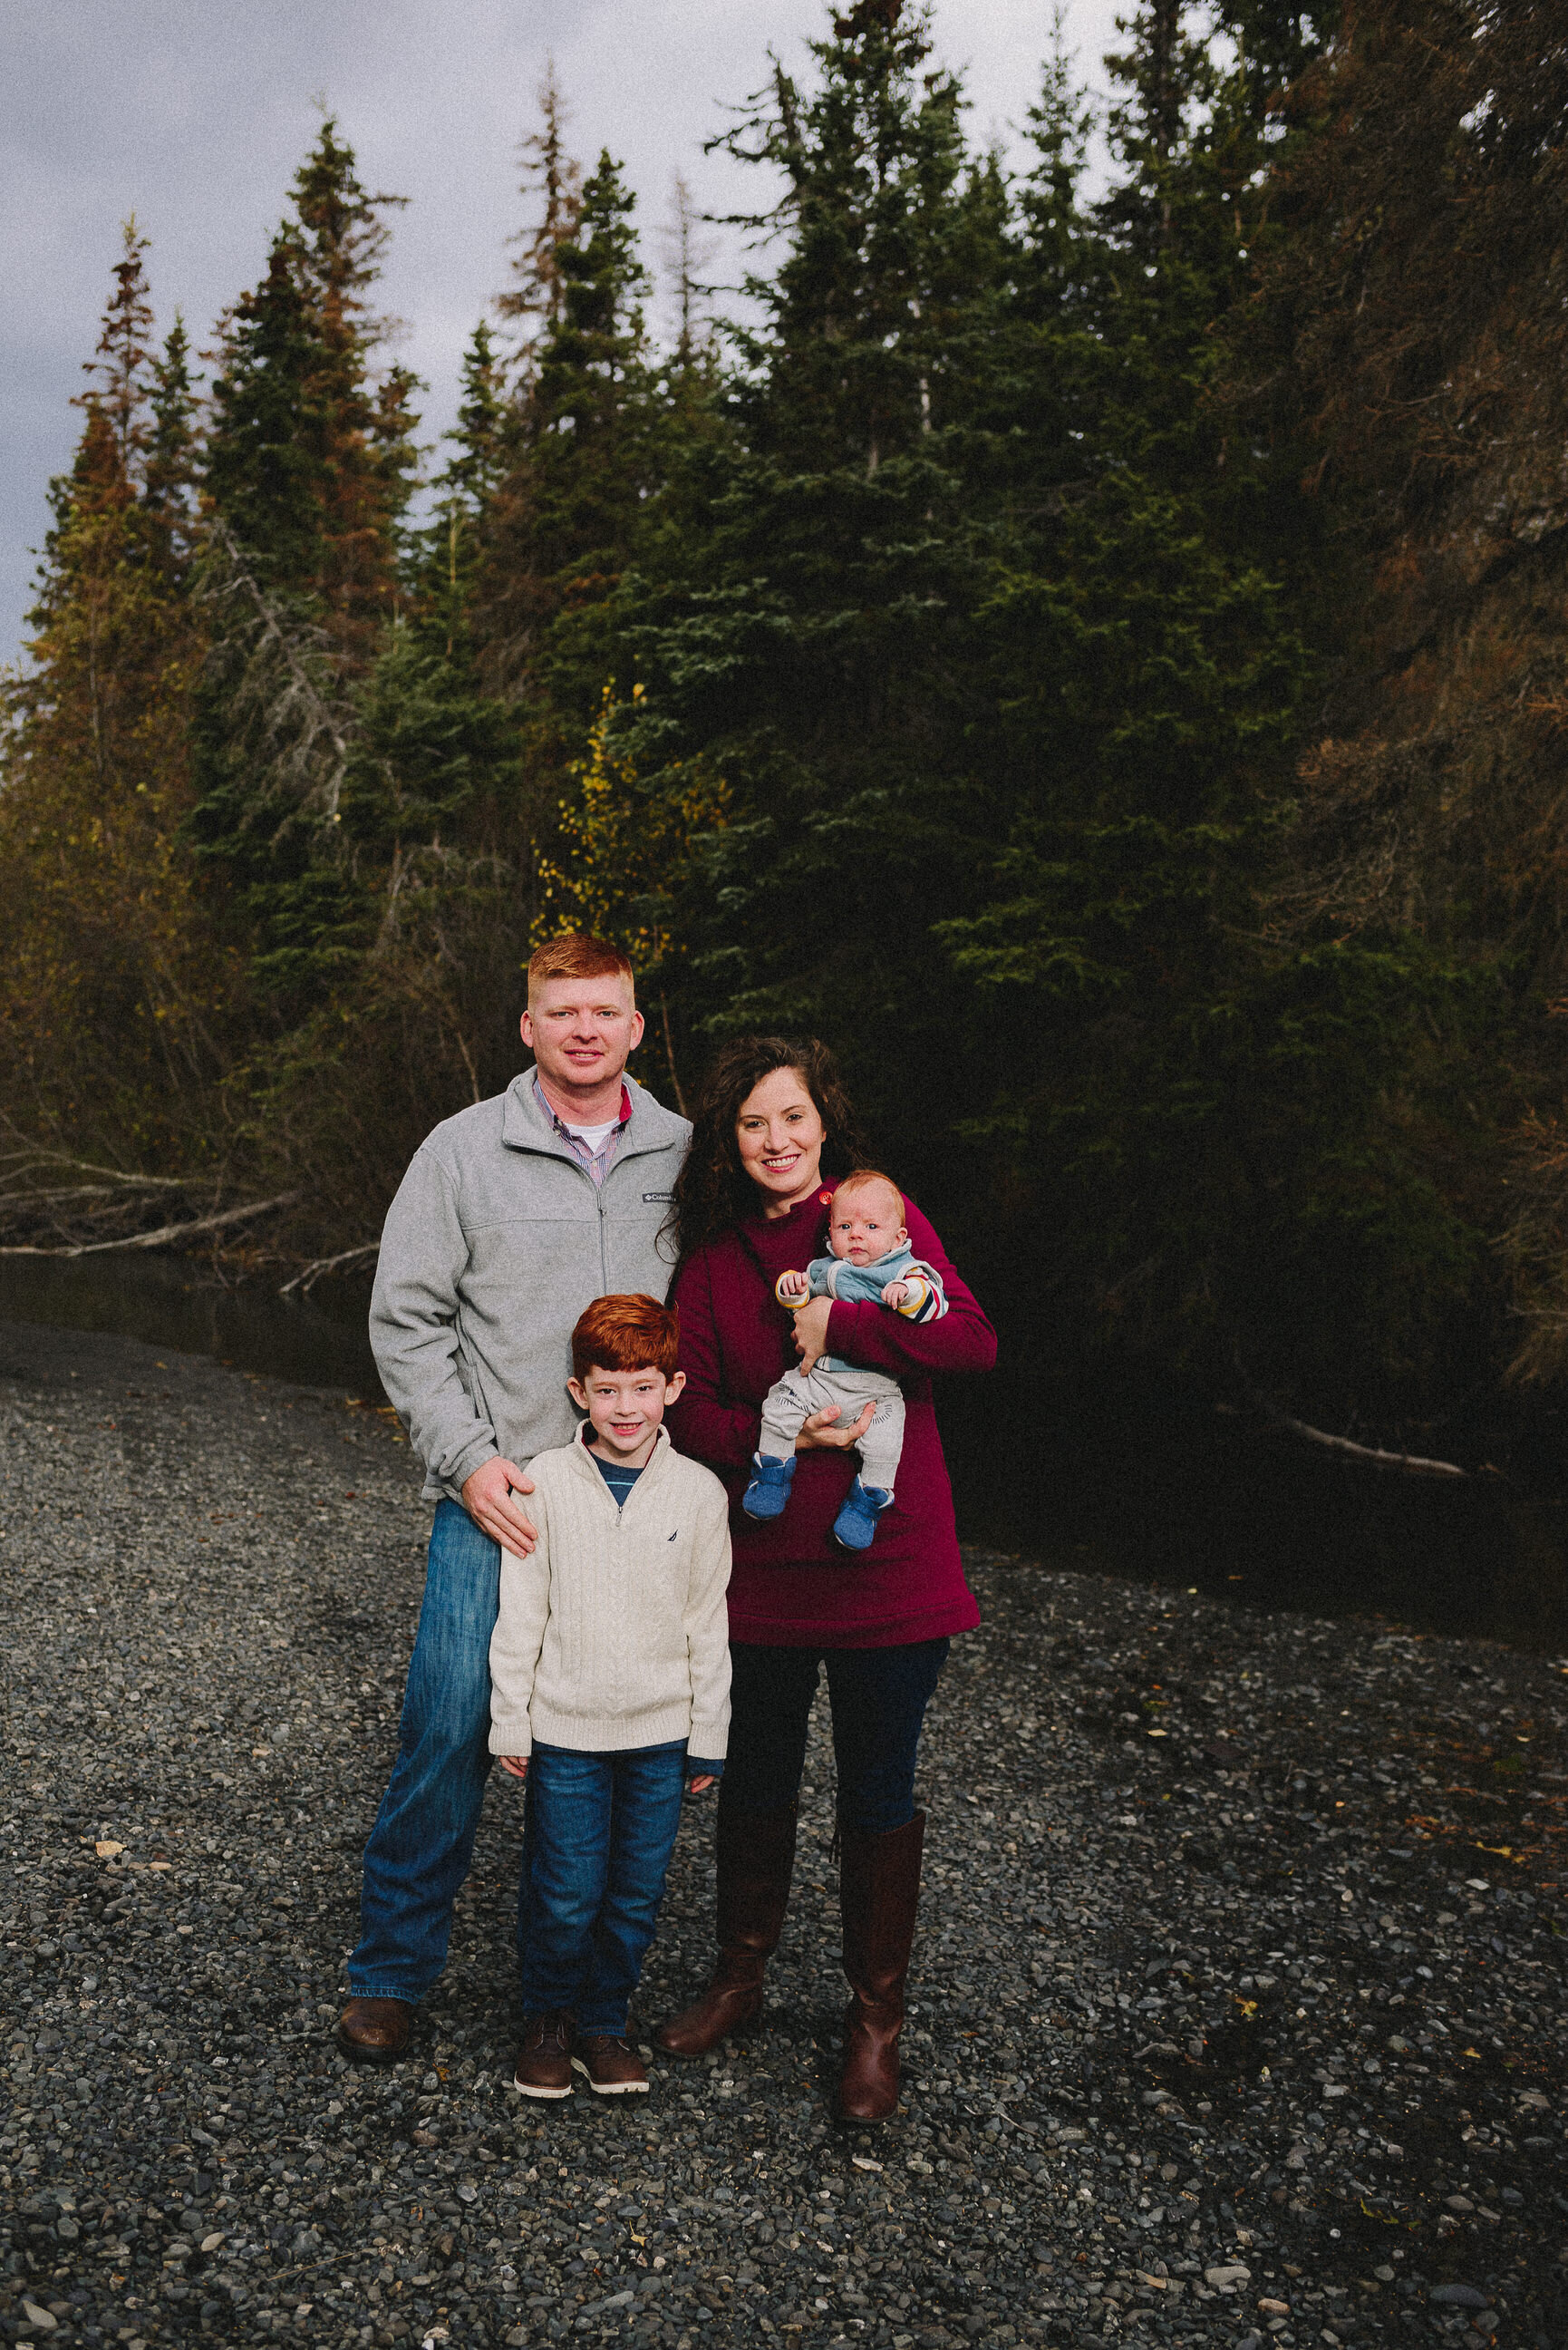 north-fork-eagle-river-fall-family-session-alaska-photographer-way-up-north-photography (21).jpg